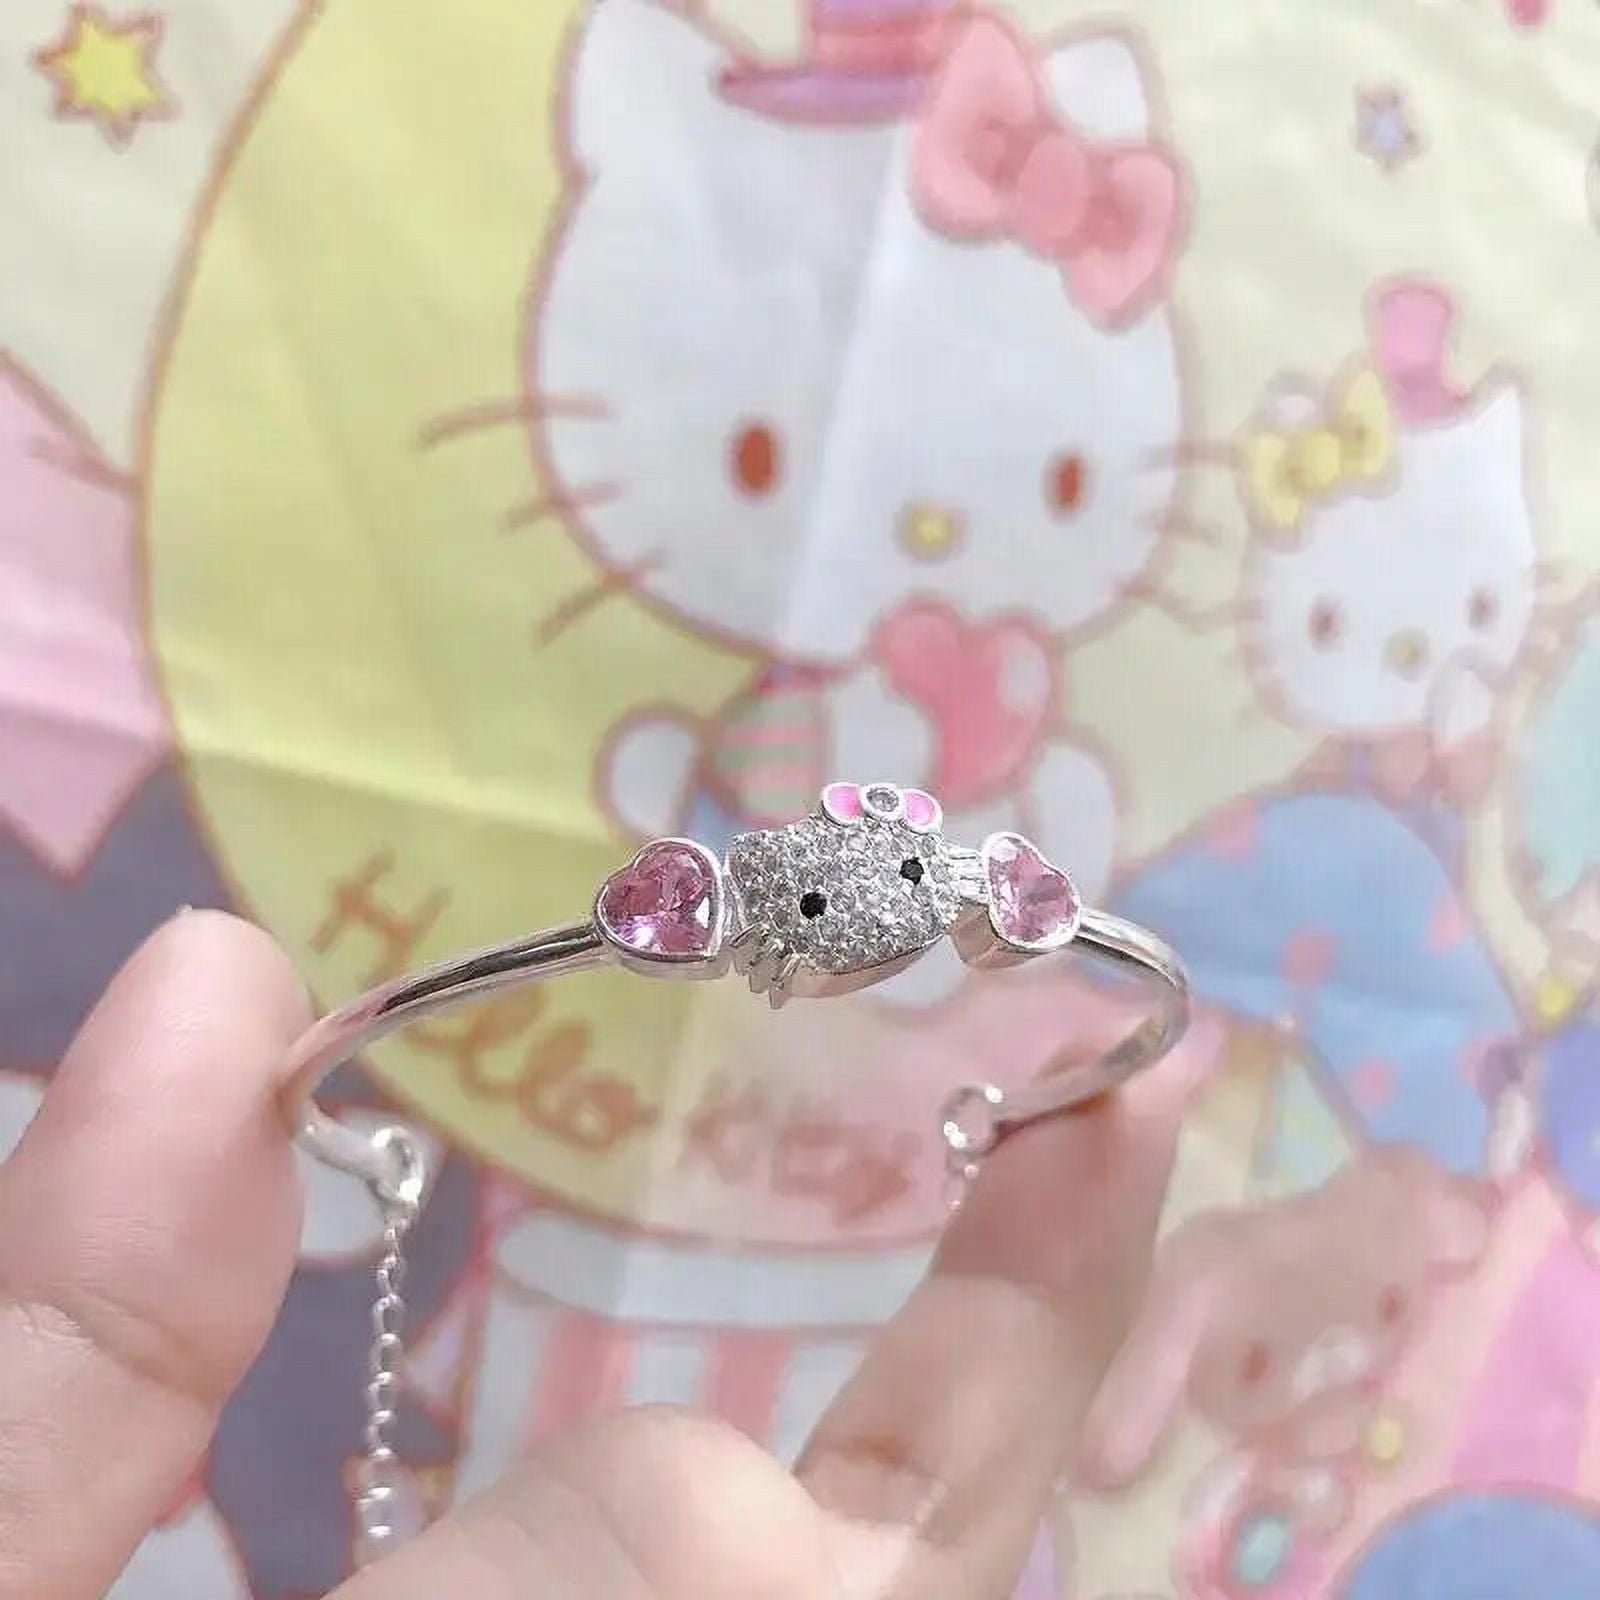 Hello Kitty Bracelet Accessories Kawaii Fashion Sweet Bow Silver Ring  Jewelry Girls Cartoon Bracelets Toys for Parent-Child Gift